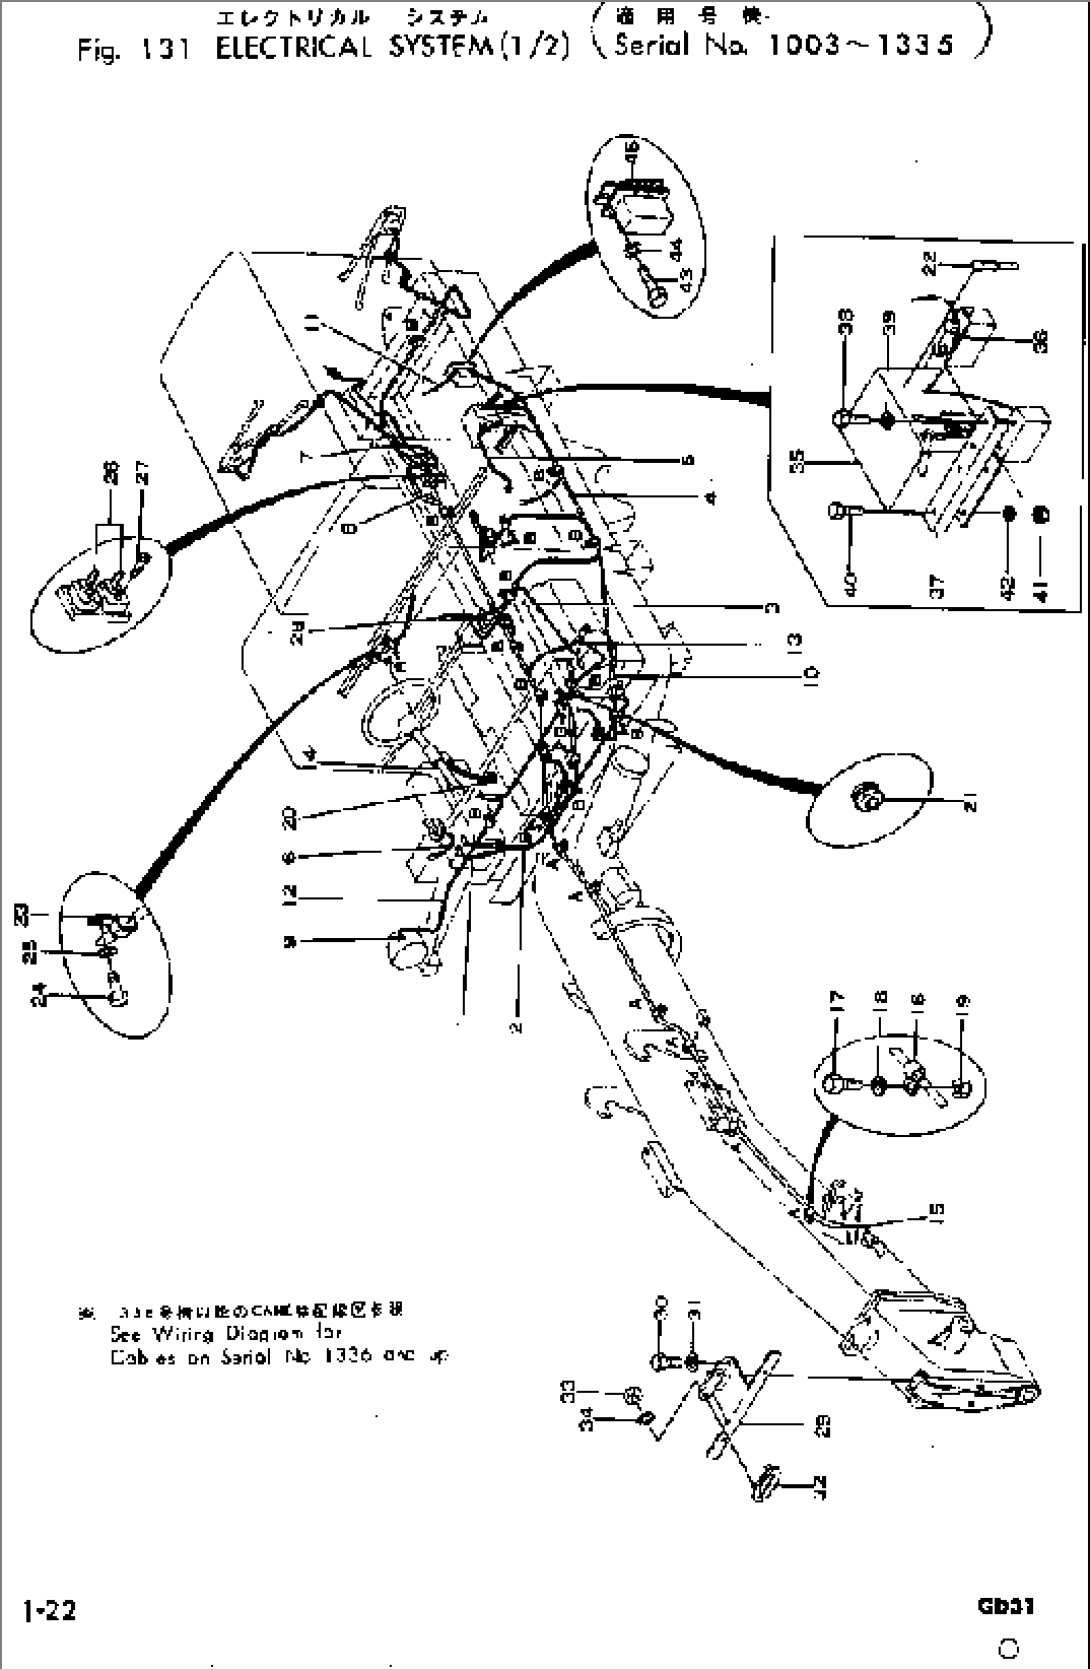 ELECTRICAL SYSTEM (1/2)(#1003-1335)